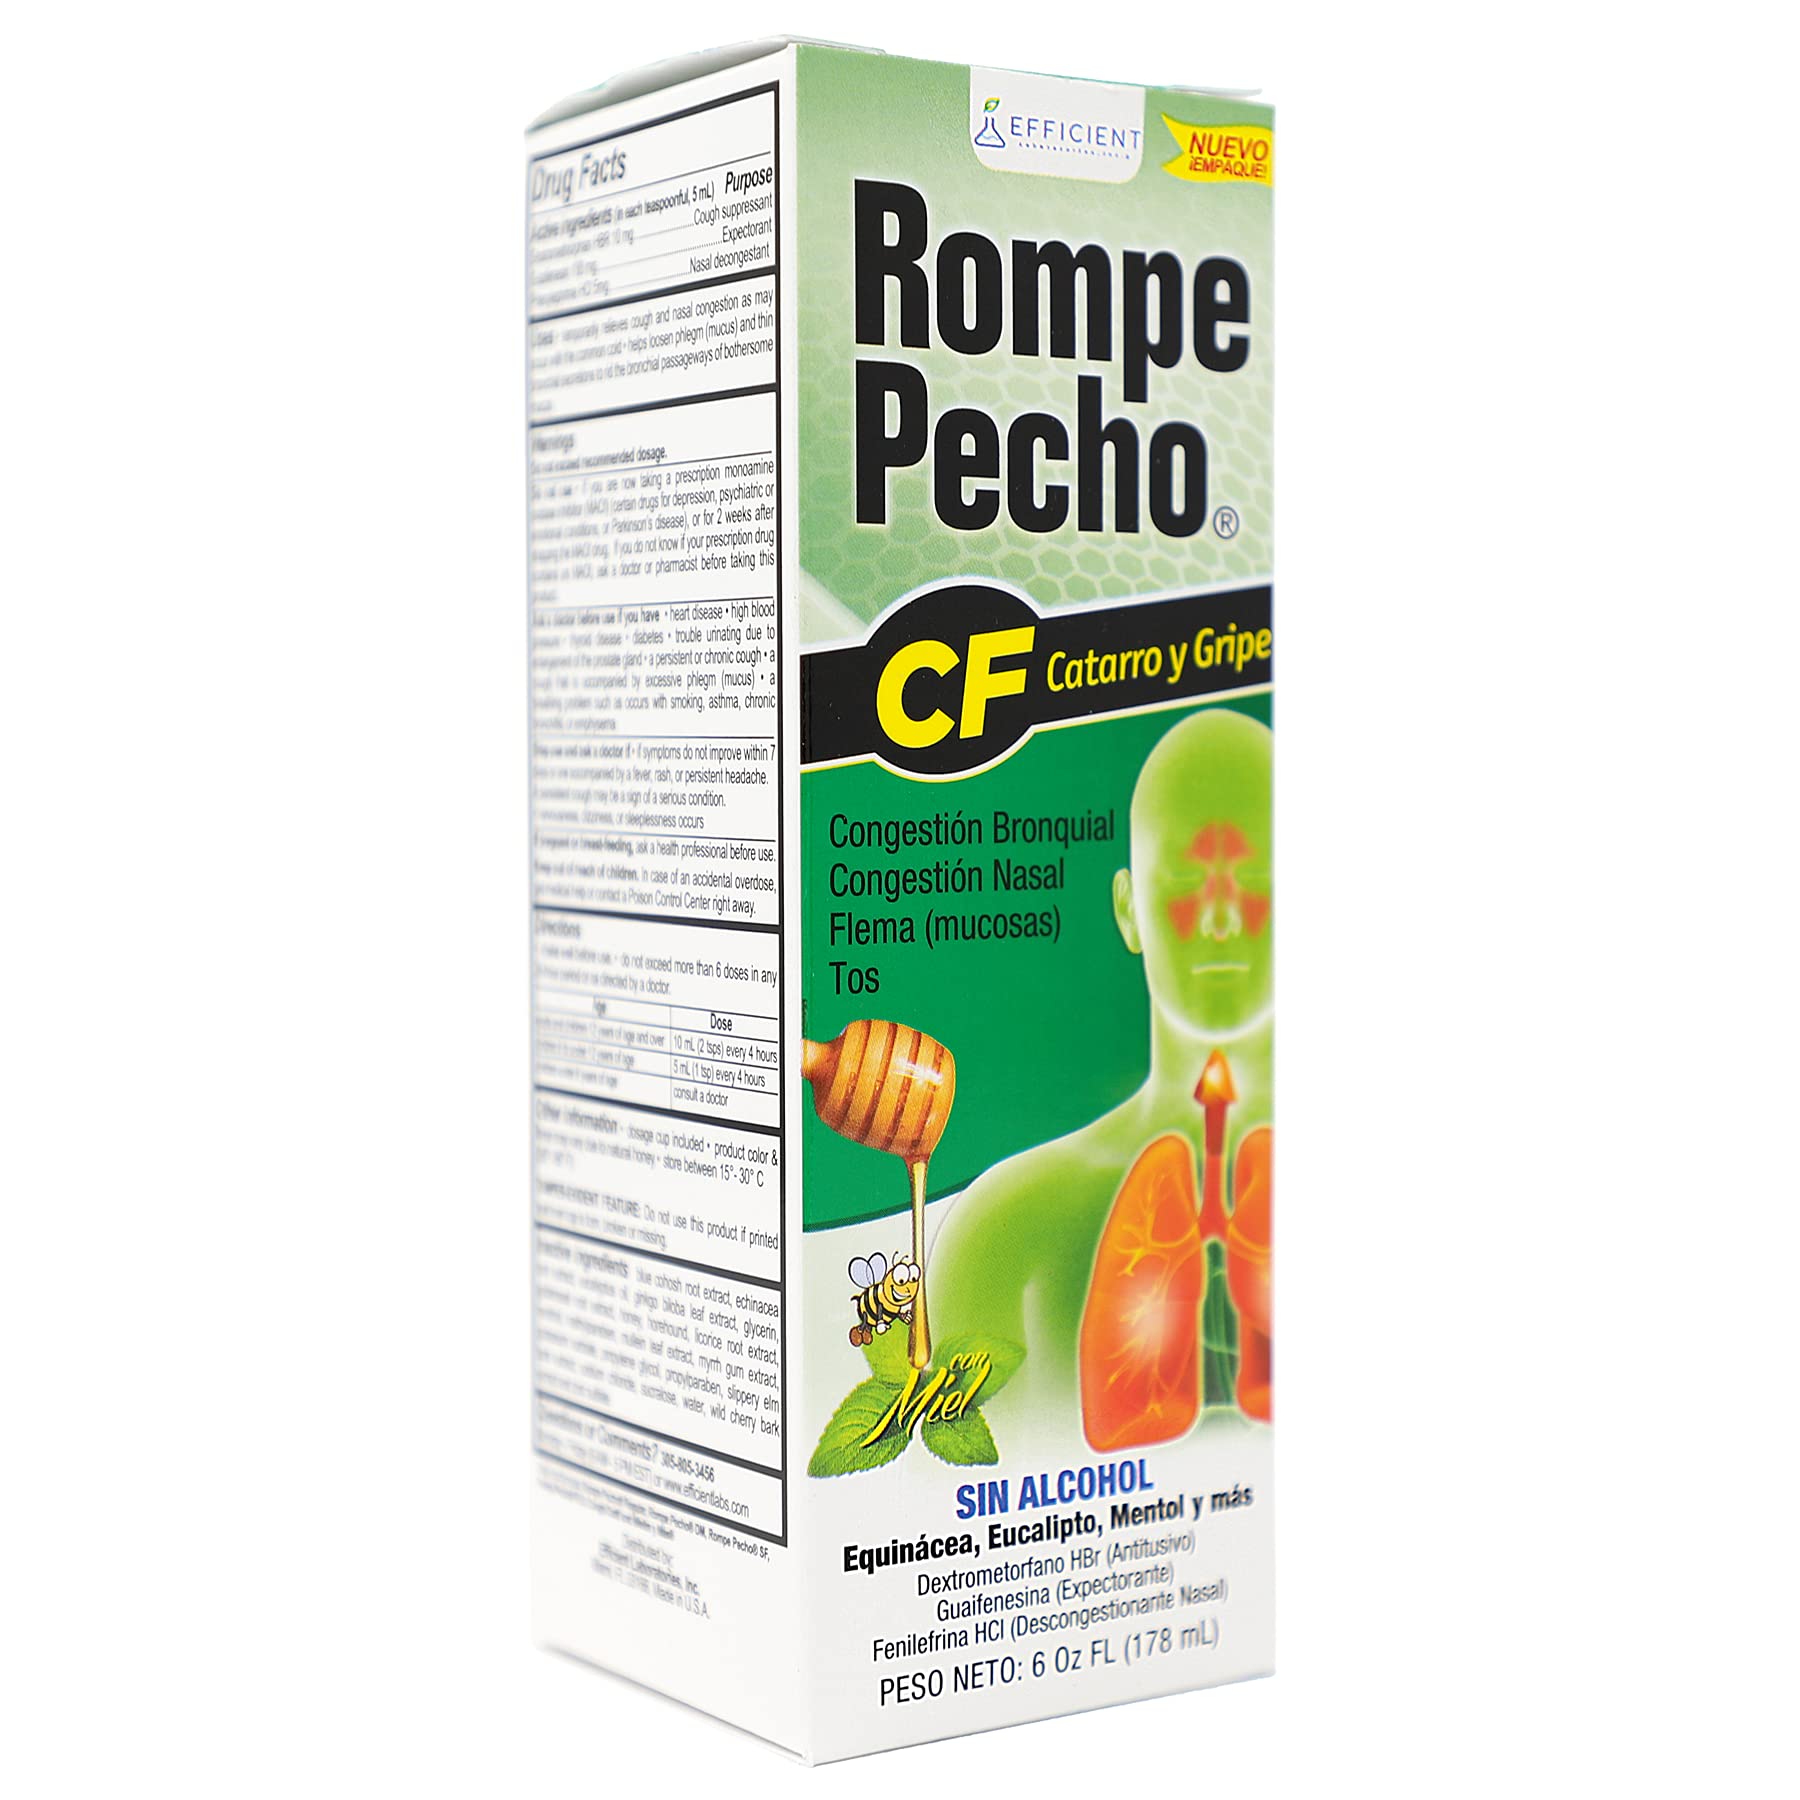 ROMPE PECHO CF, Cold and Flu Syrup, 6 FL Oz, Bottle (Pack of 3)